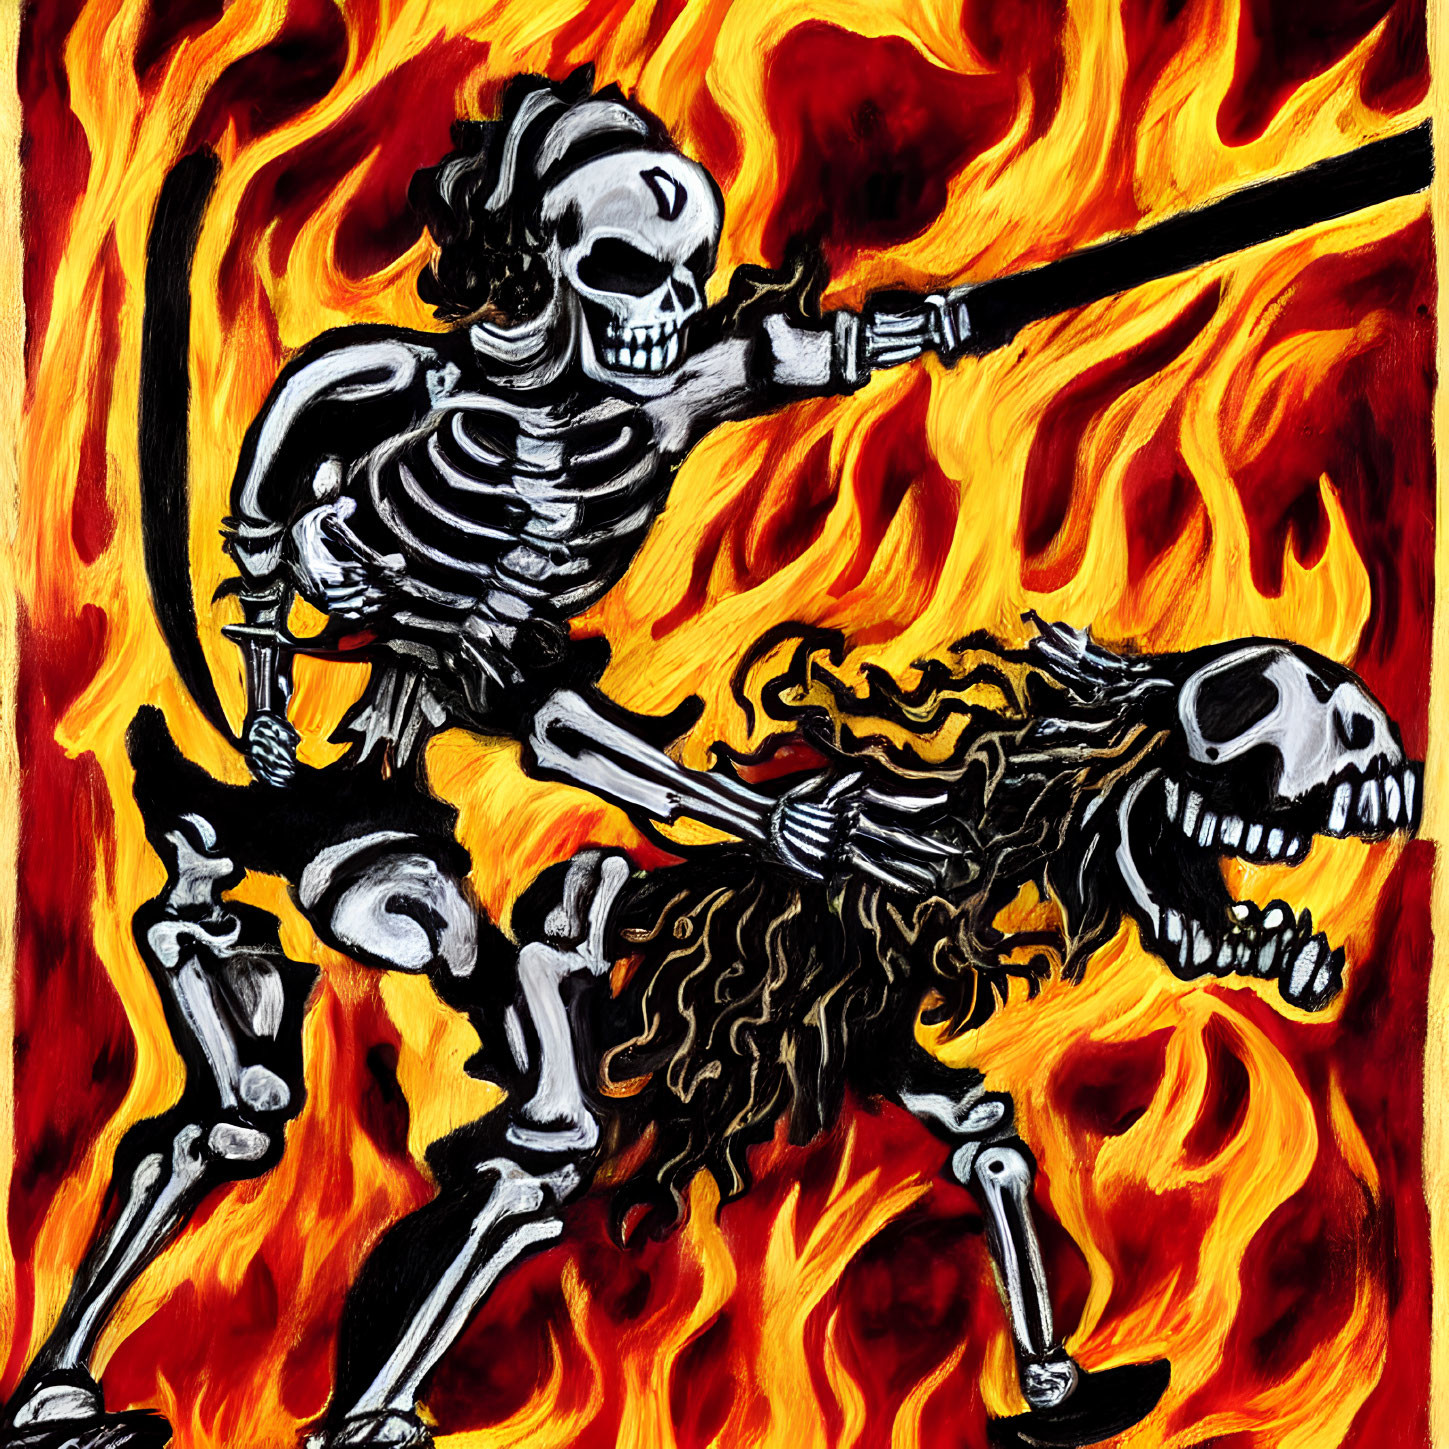 Skeletons in battle surrounded by flames, one standing with sword, one kneeling.